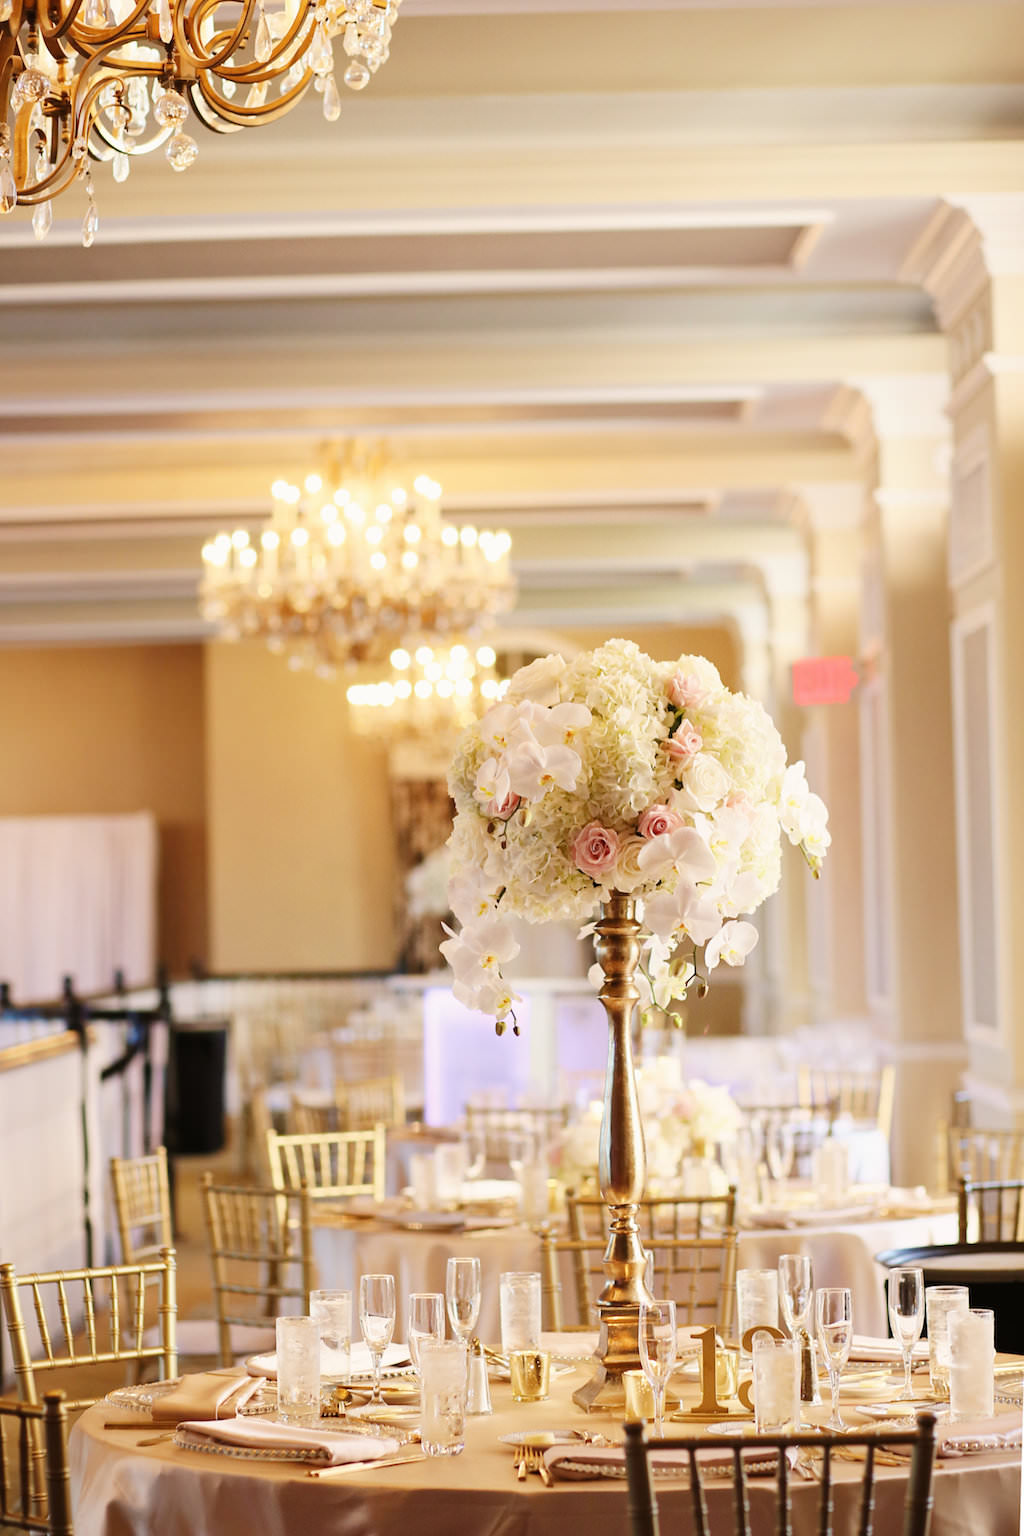 Tall Wedding Reception Centerpiece with White Hydrangeas and Orchids, Blush Roses in Tall Gold Vase | Tampa Bay Wedding Venue The Don Cesar | St Petersburg Wedding Planner Parties A La Carte